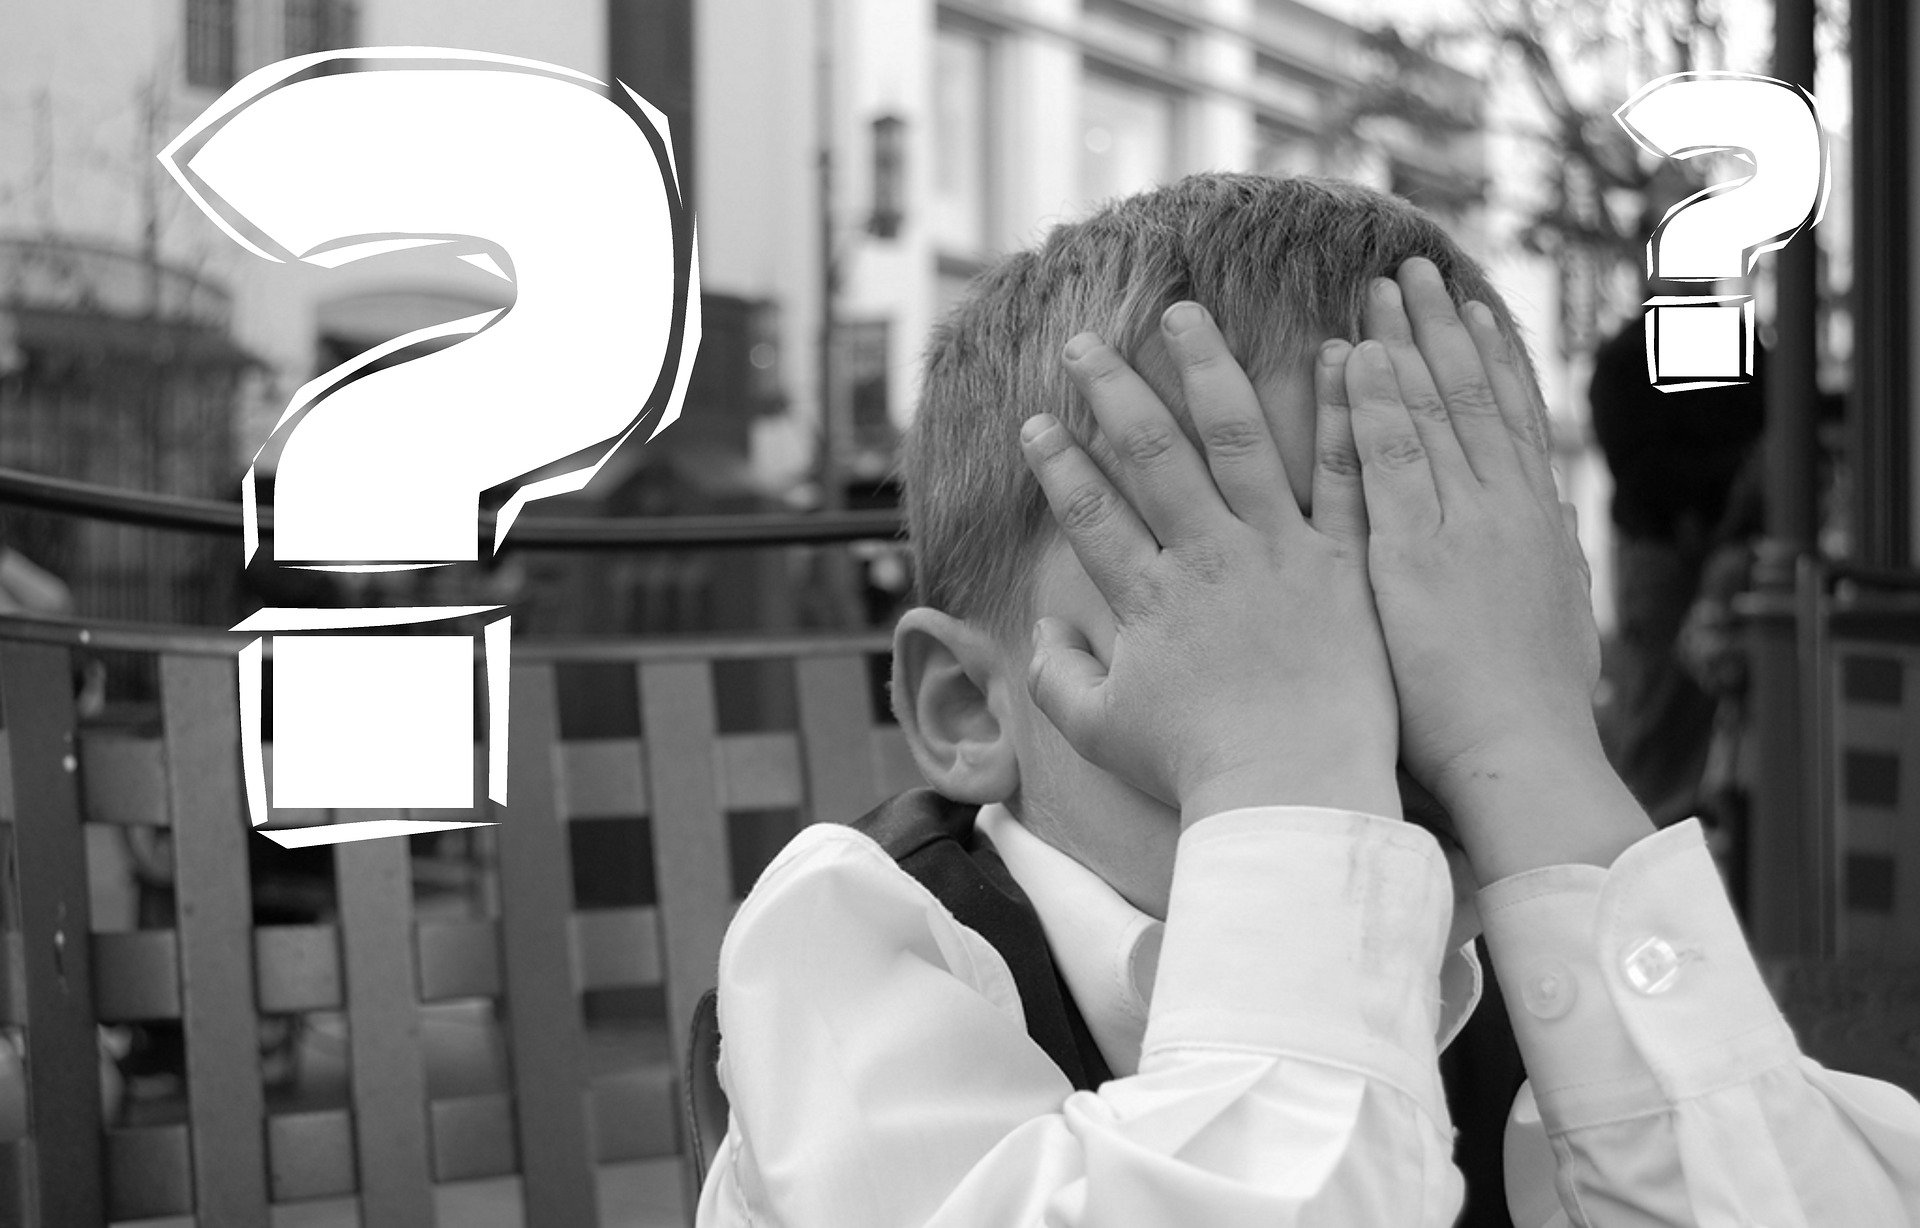 Young boy covering his head with question marks around him